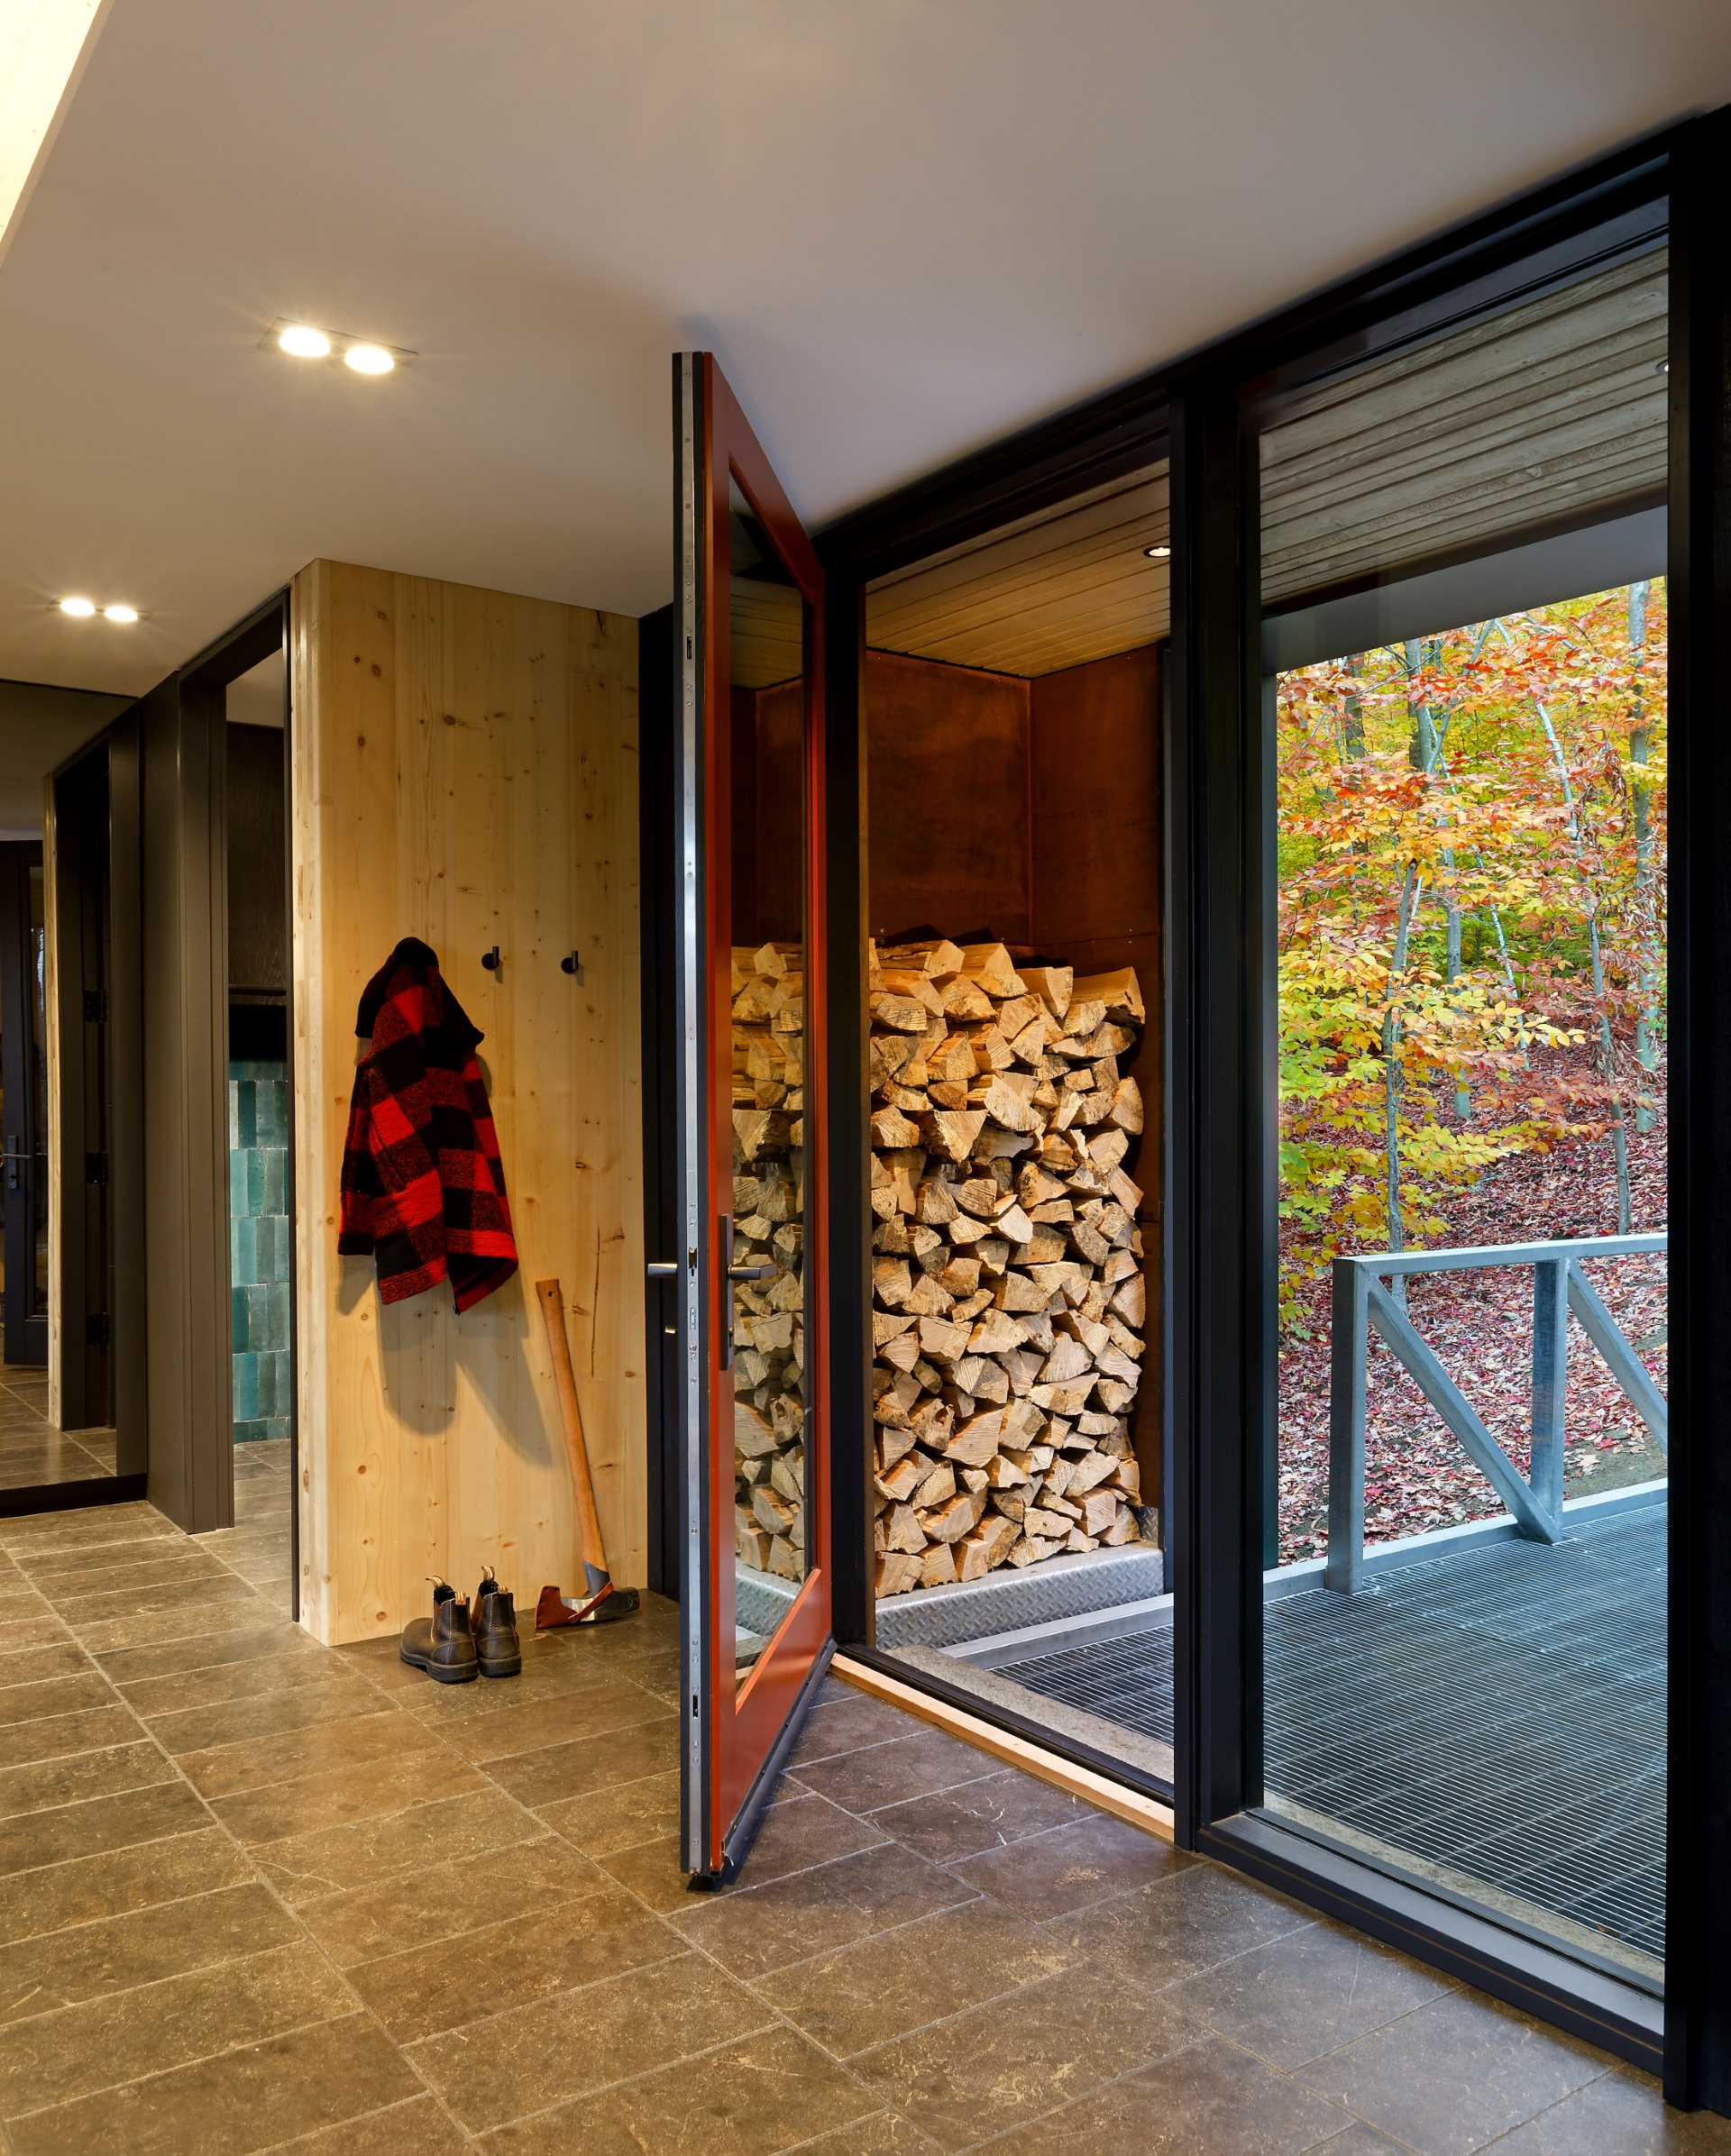 The entryway of this lakehouse includes outdoor storage for firewood.